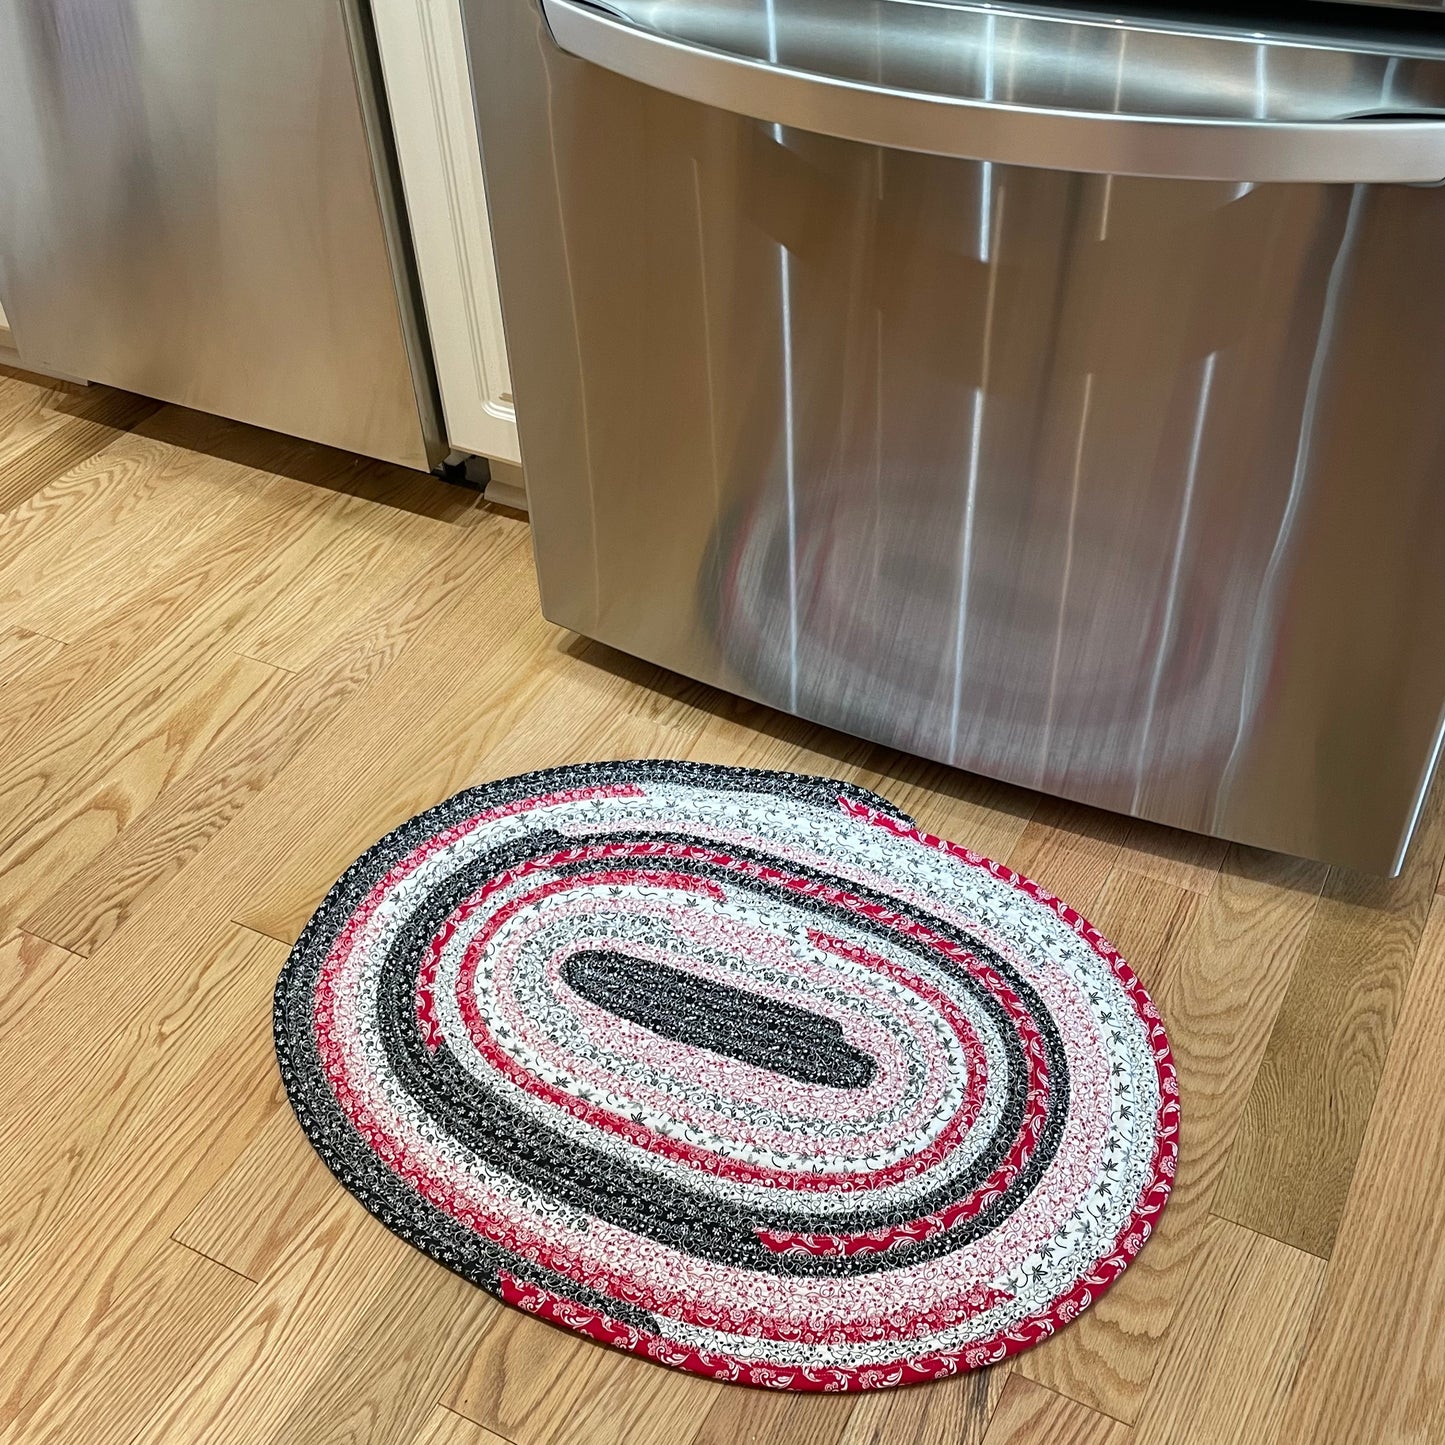 Red white and black flower print rug. Washable kitchen accent rug made with quality quilting cotton and cotton/poly fill. Part of a mix and match collection of coordinated modern farmhouse kitchen decor. Shop the entire catalogue or follow along on the Home Stitchery Decor YouTube Channel.